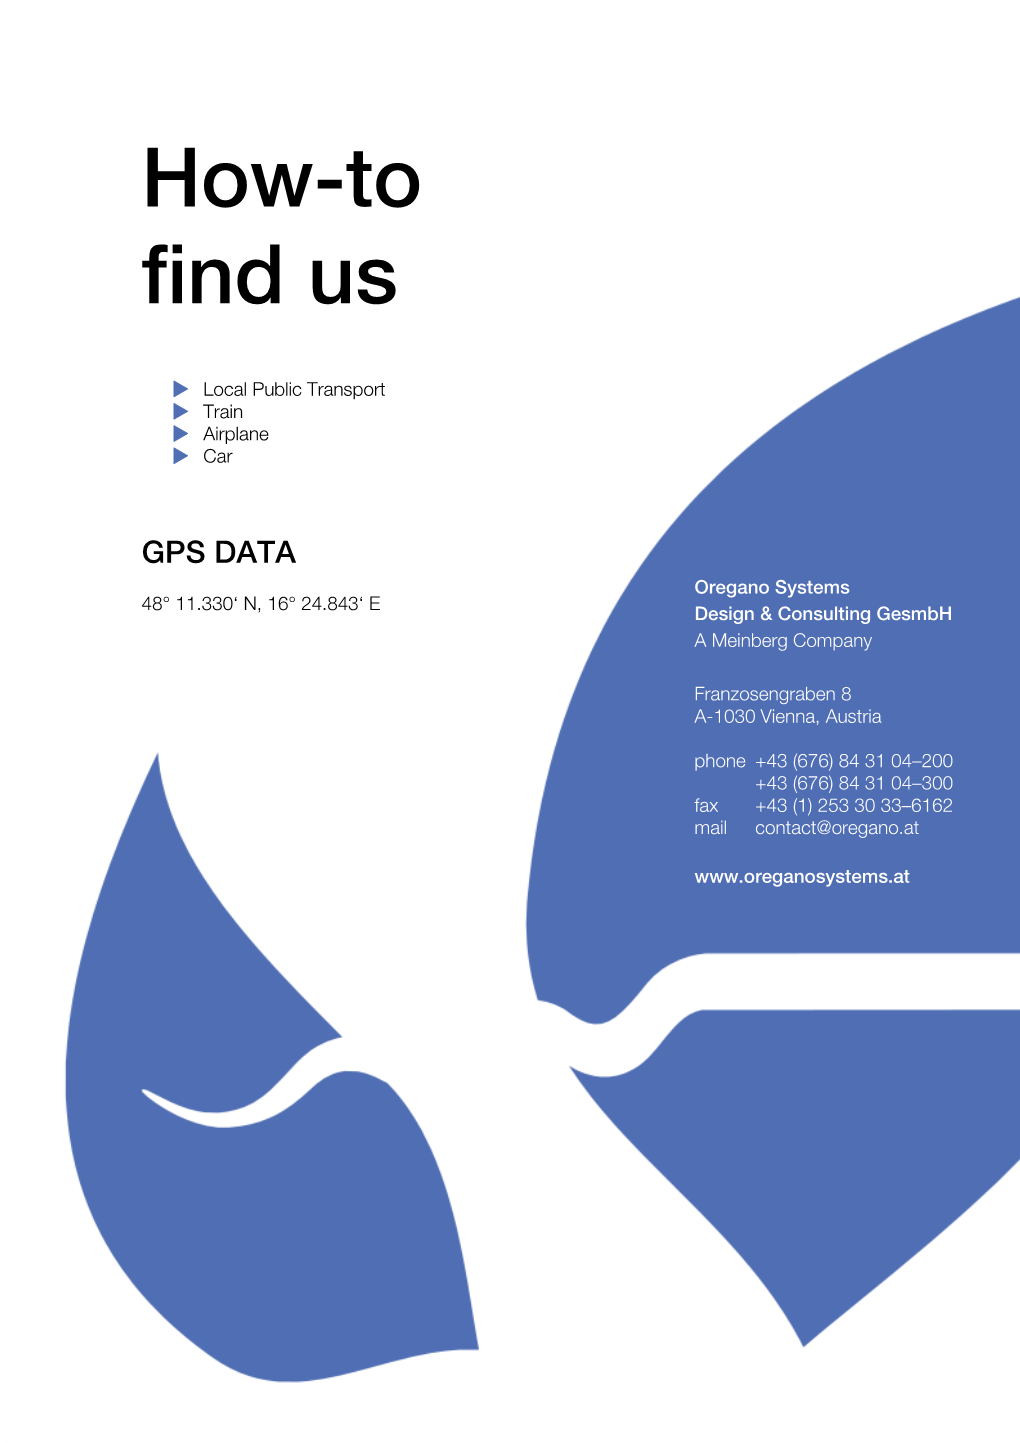 How-To Find Us